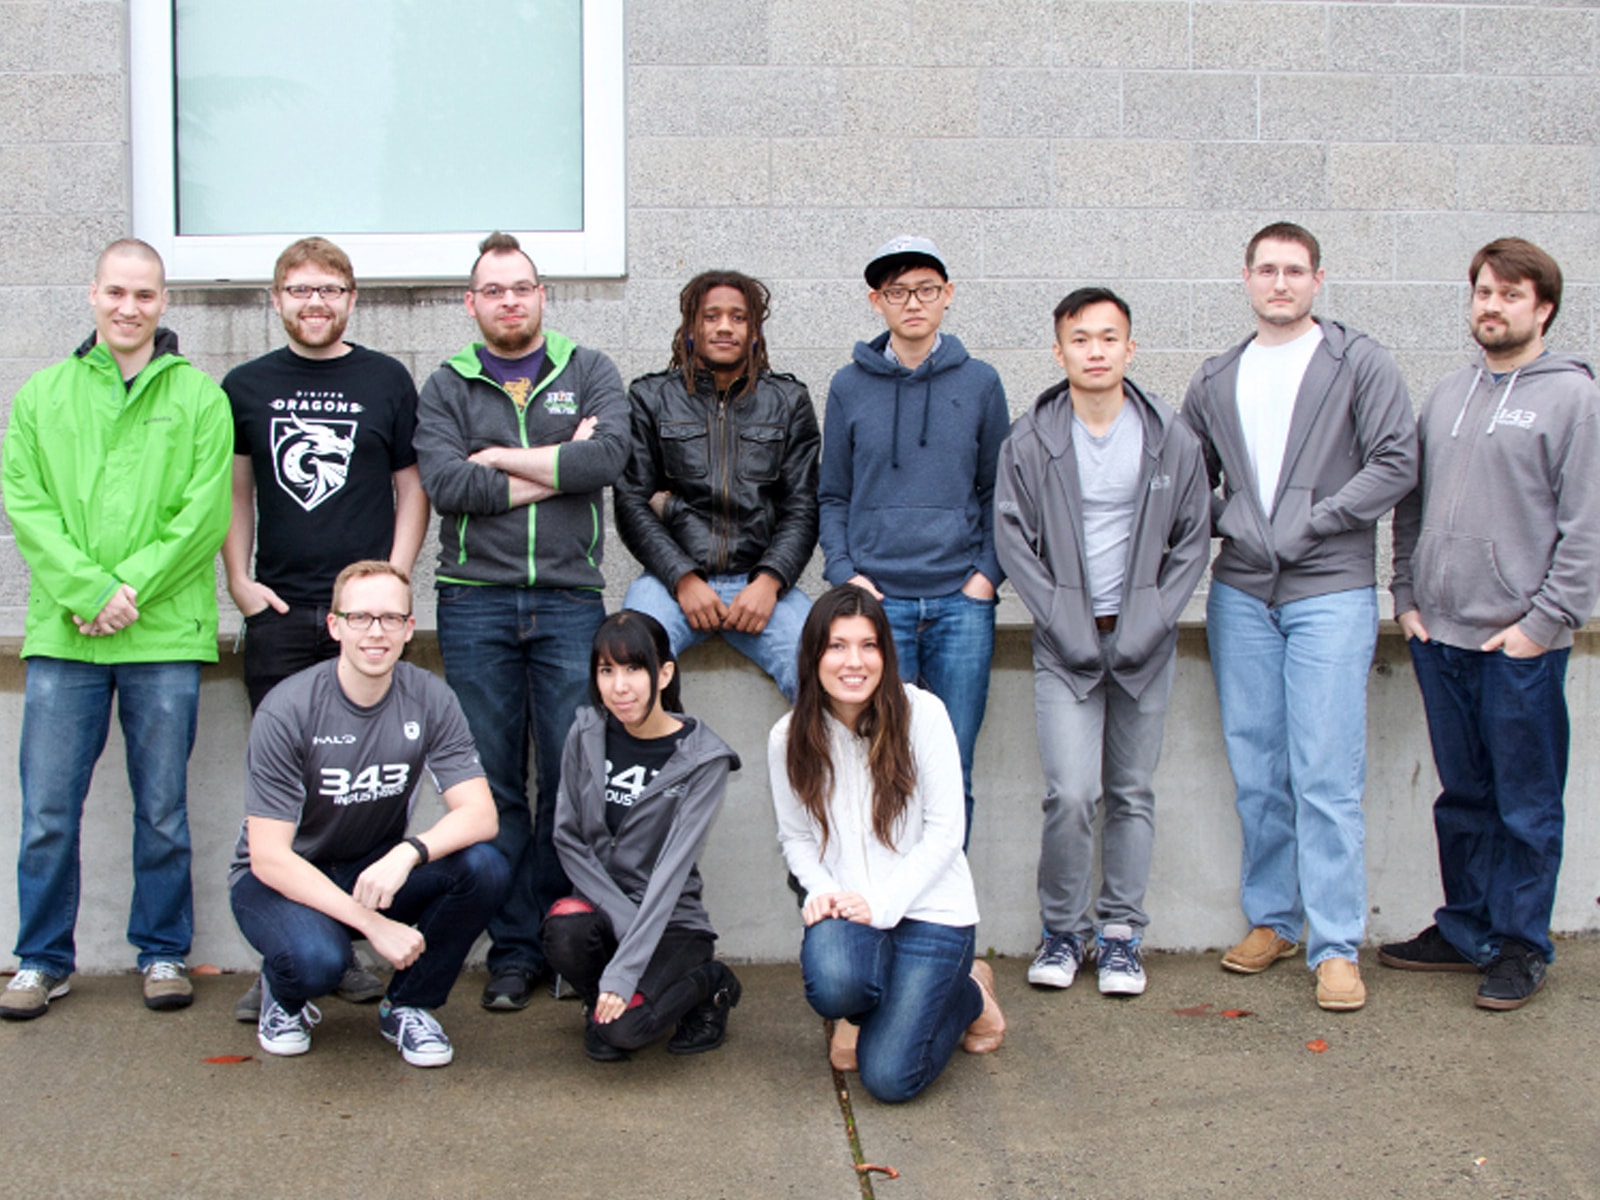 Group photo of 11 DigiPen alumni who worked on Halo 5